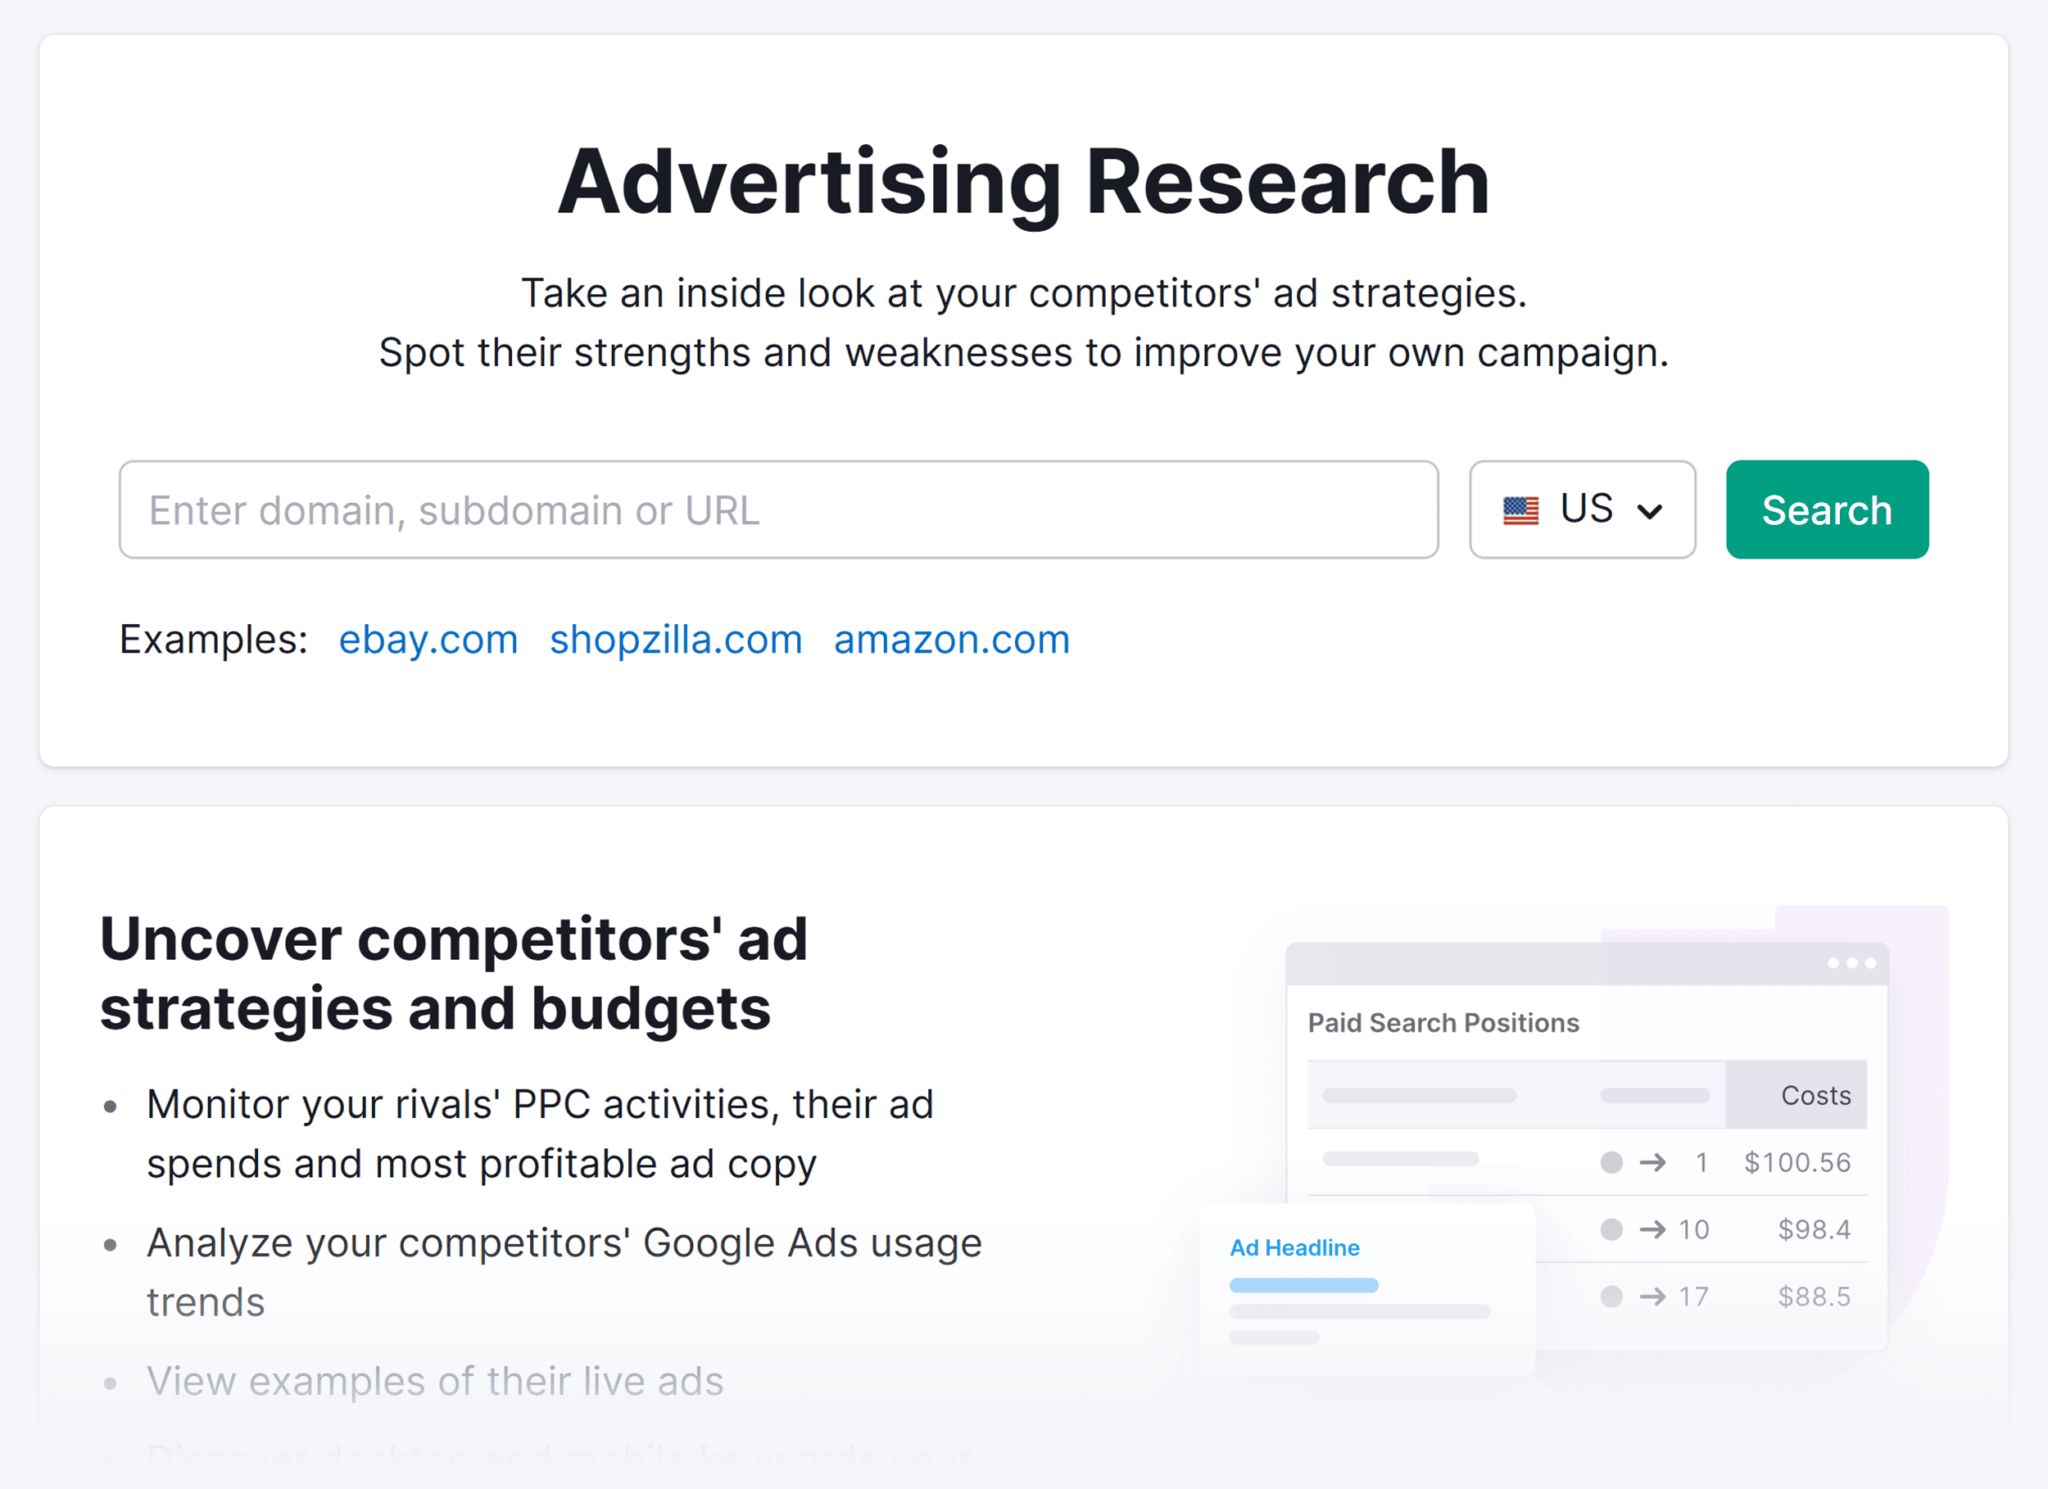 semrush-advertising-research 29 Top Digital Marketing Tools for Every Budget